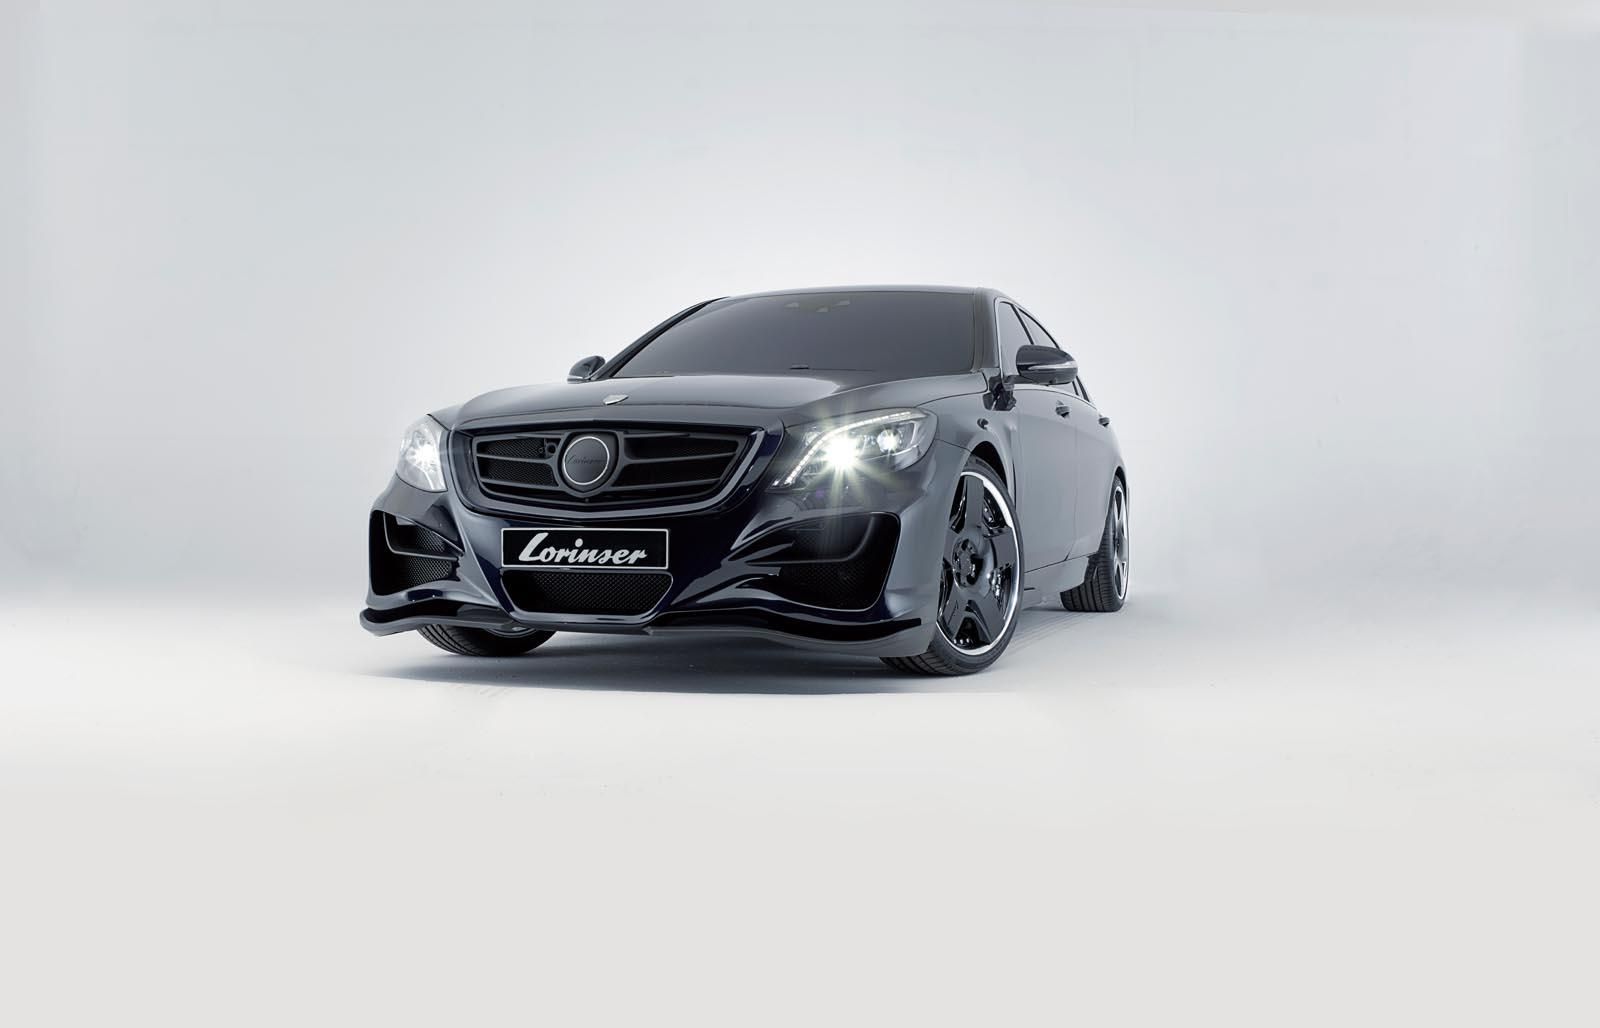 2014 Mercedes S-Class by Lorinser